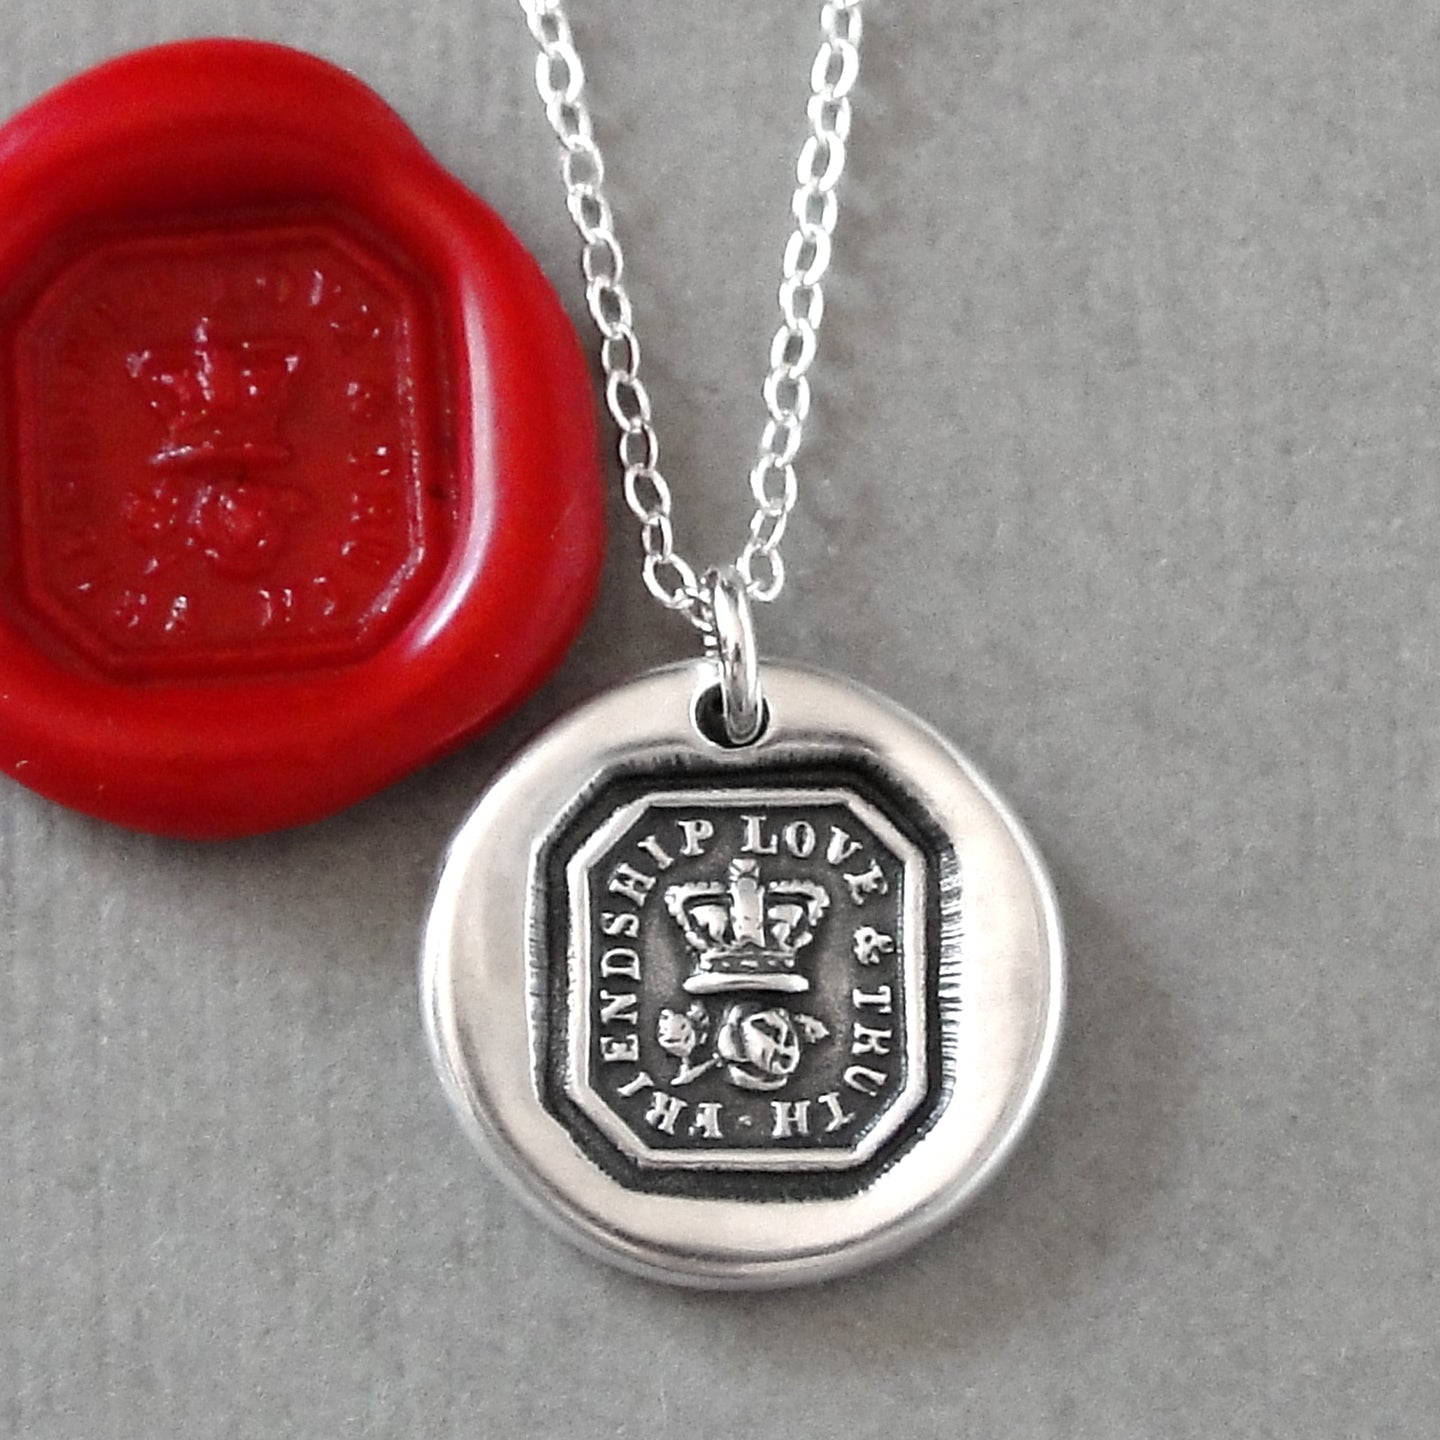 Friendship Love Truth - Wax Seal Necklace With Crown And Rose - Antique Wax Seal Jewelry